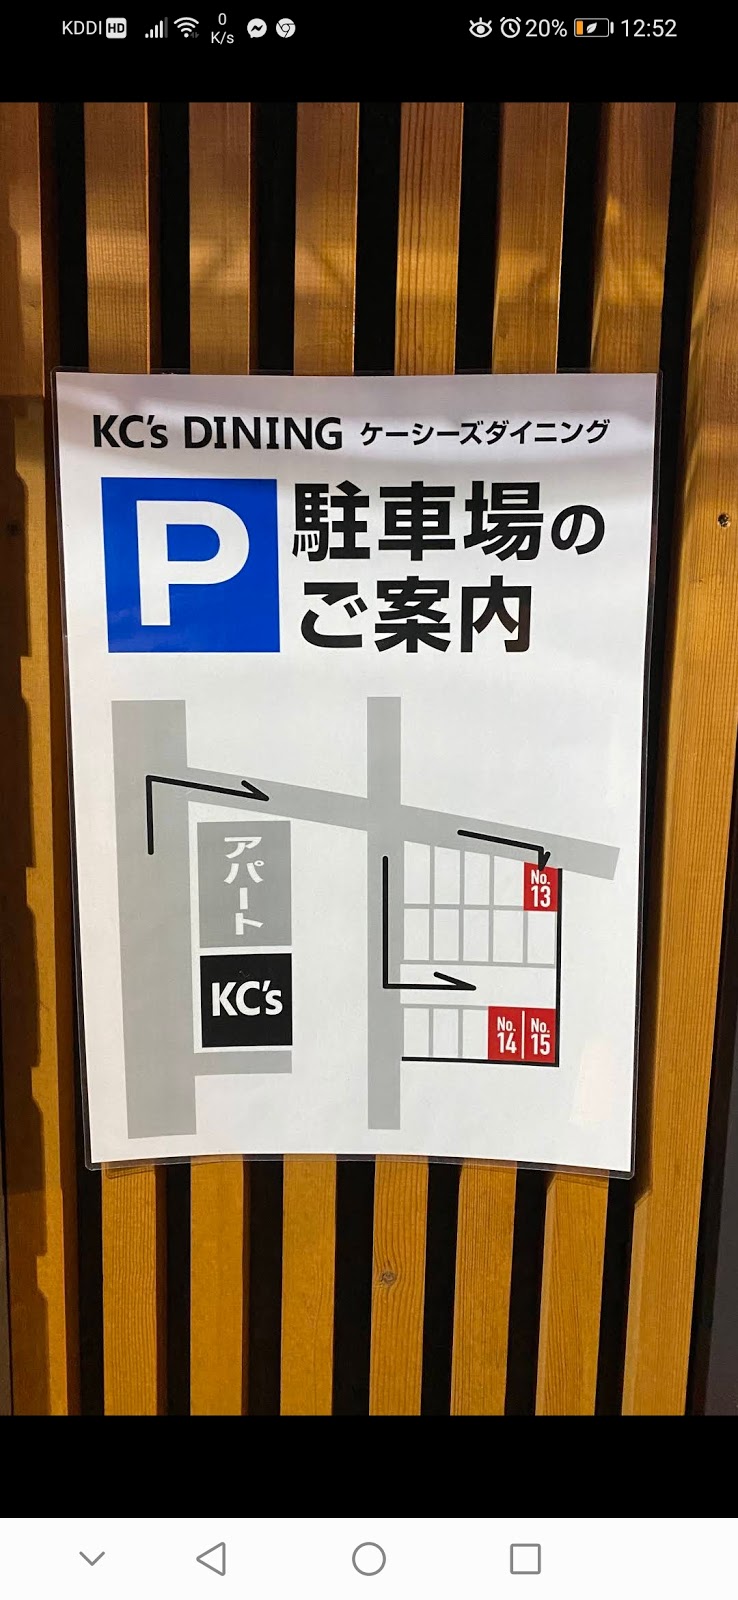 KC's Dining parkings